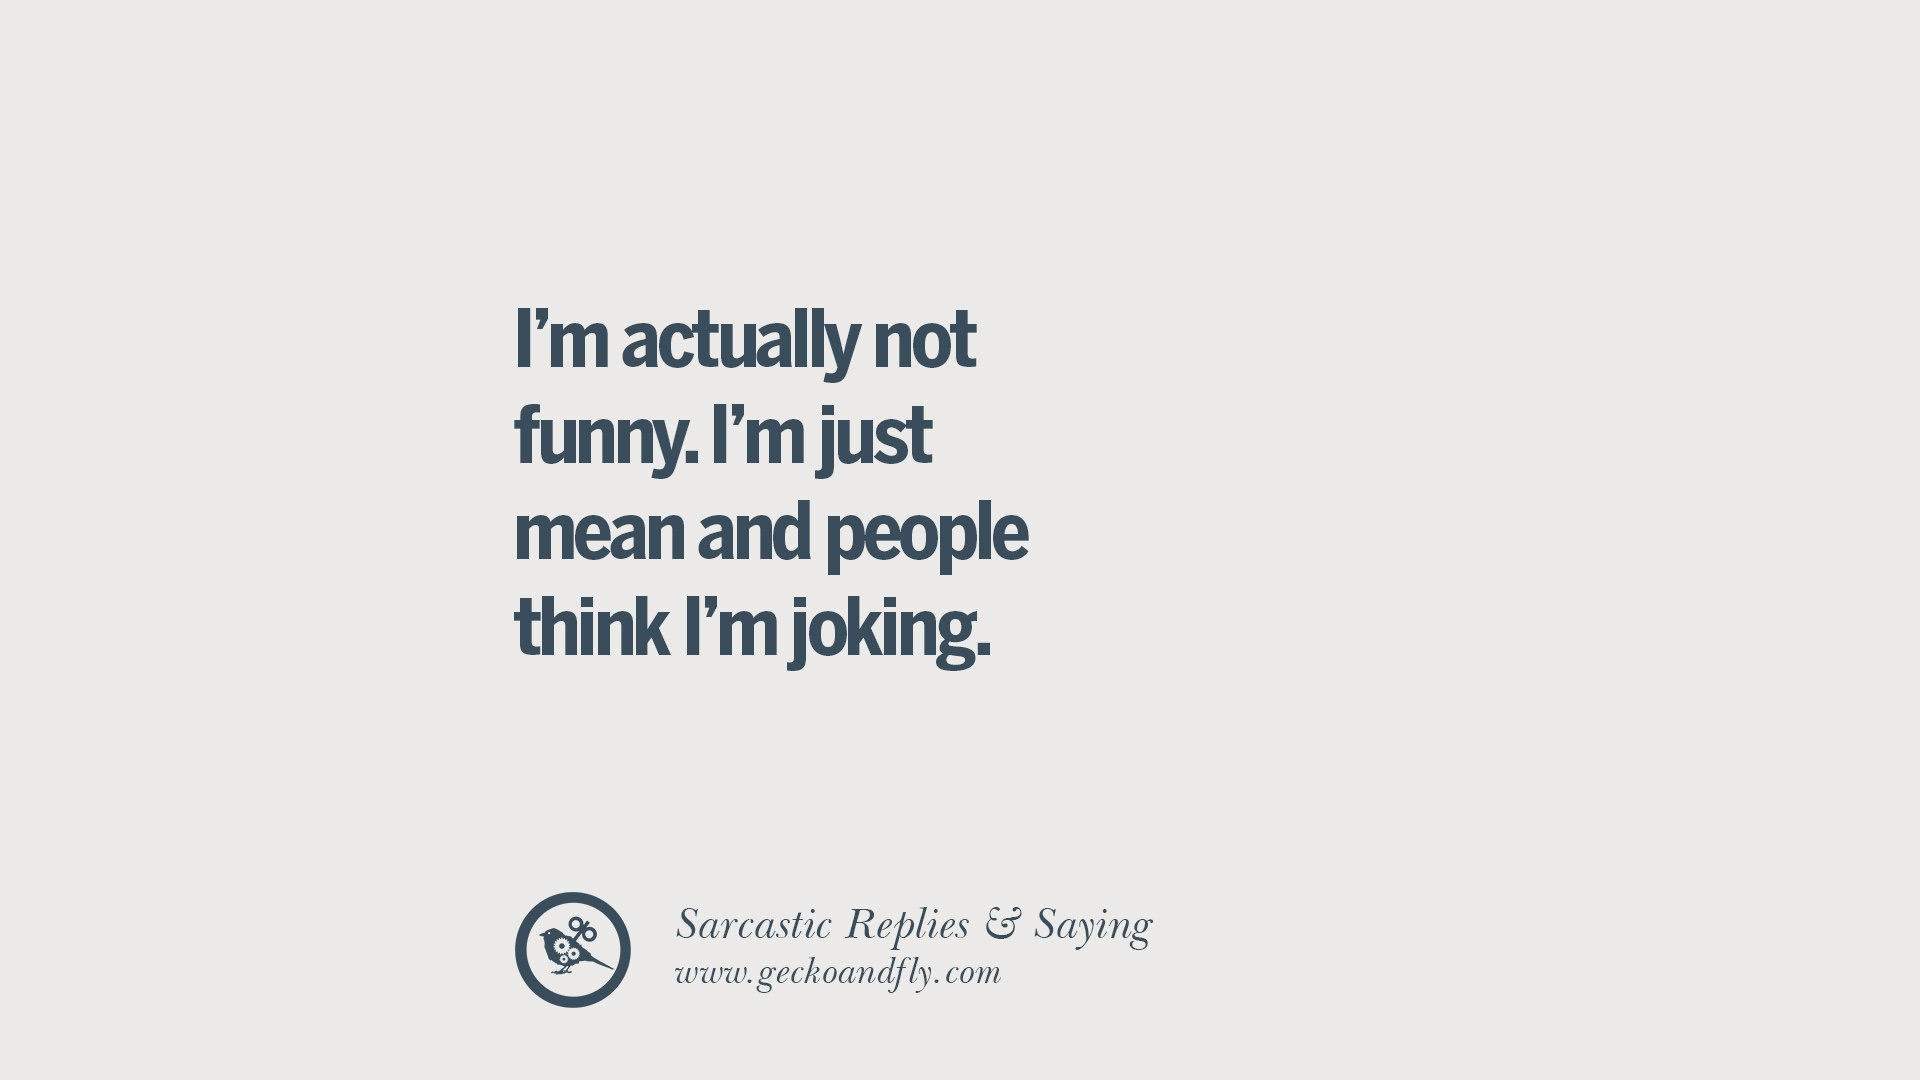 I'm Actually Not Funny Quotes About Mean People